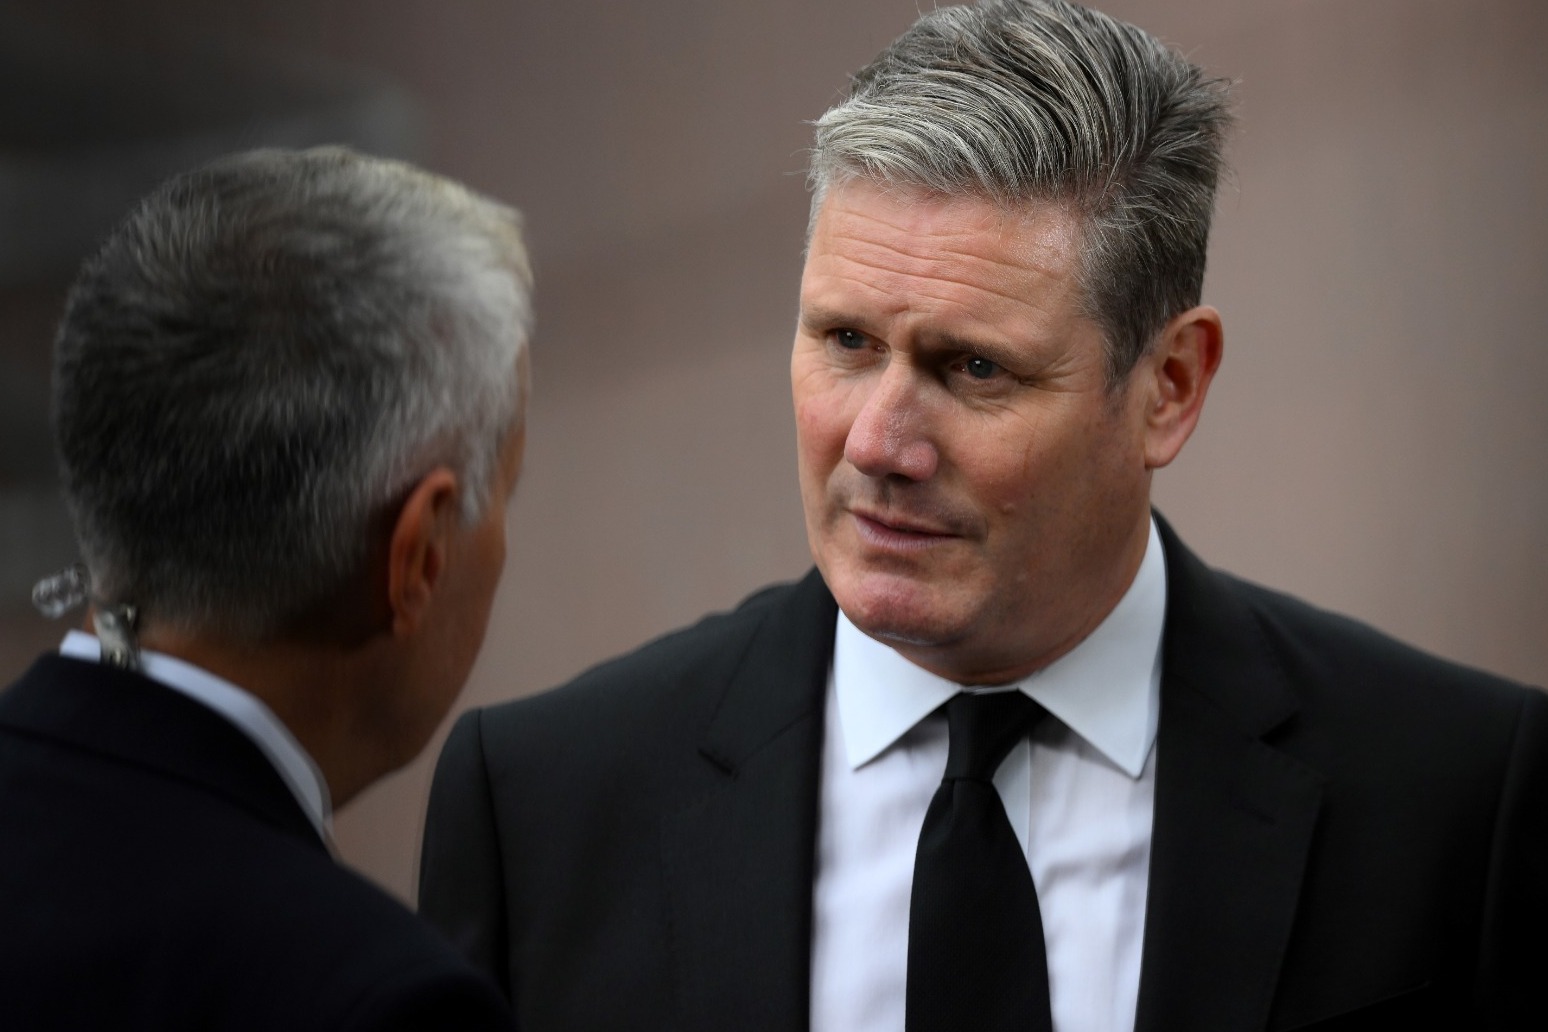 Labour conference gives Starmer chance to stress dividing lines with Tories 